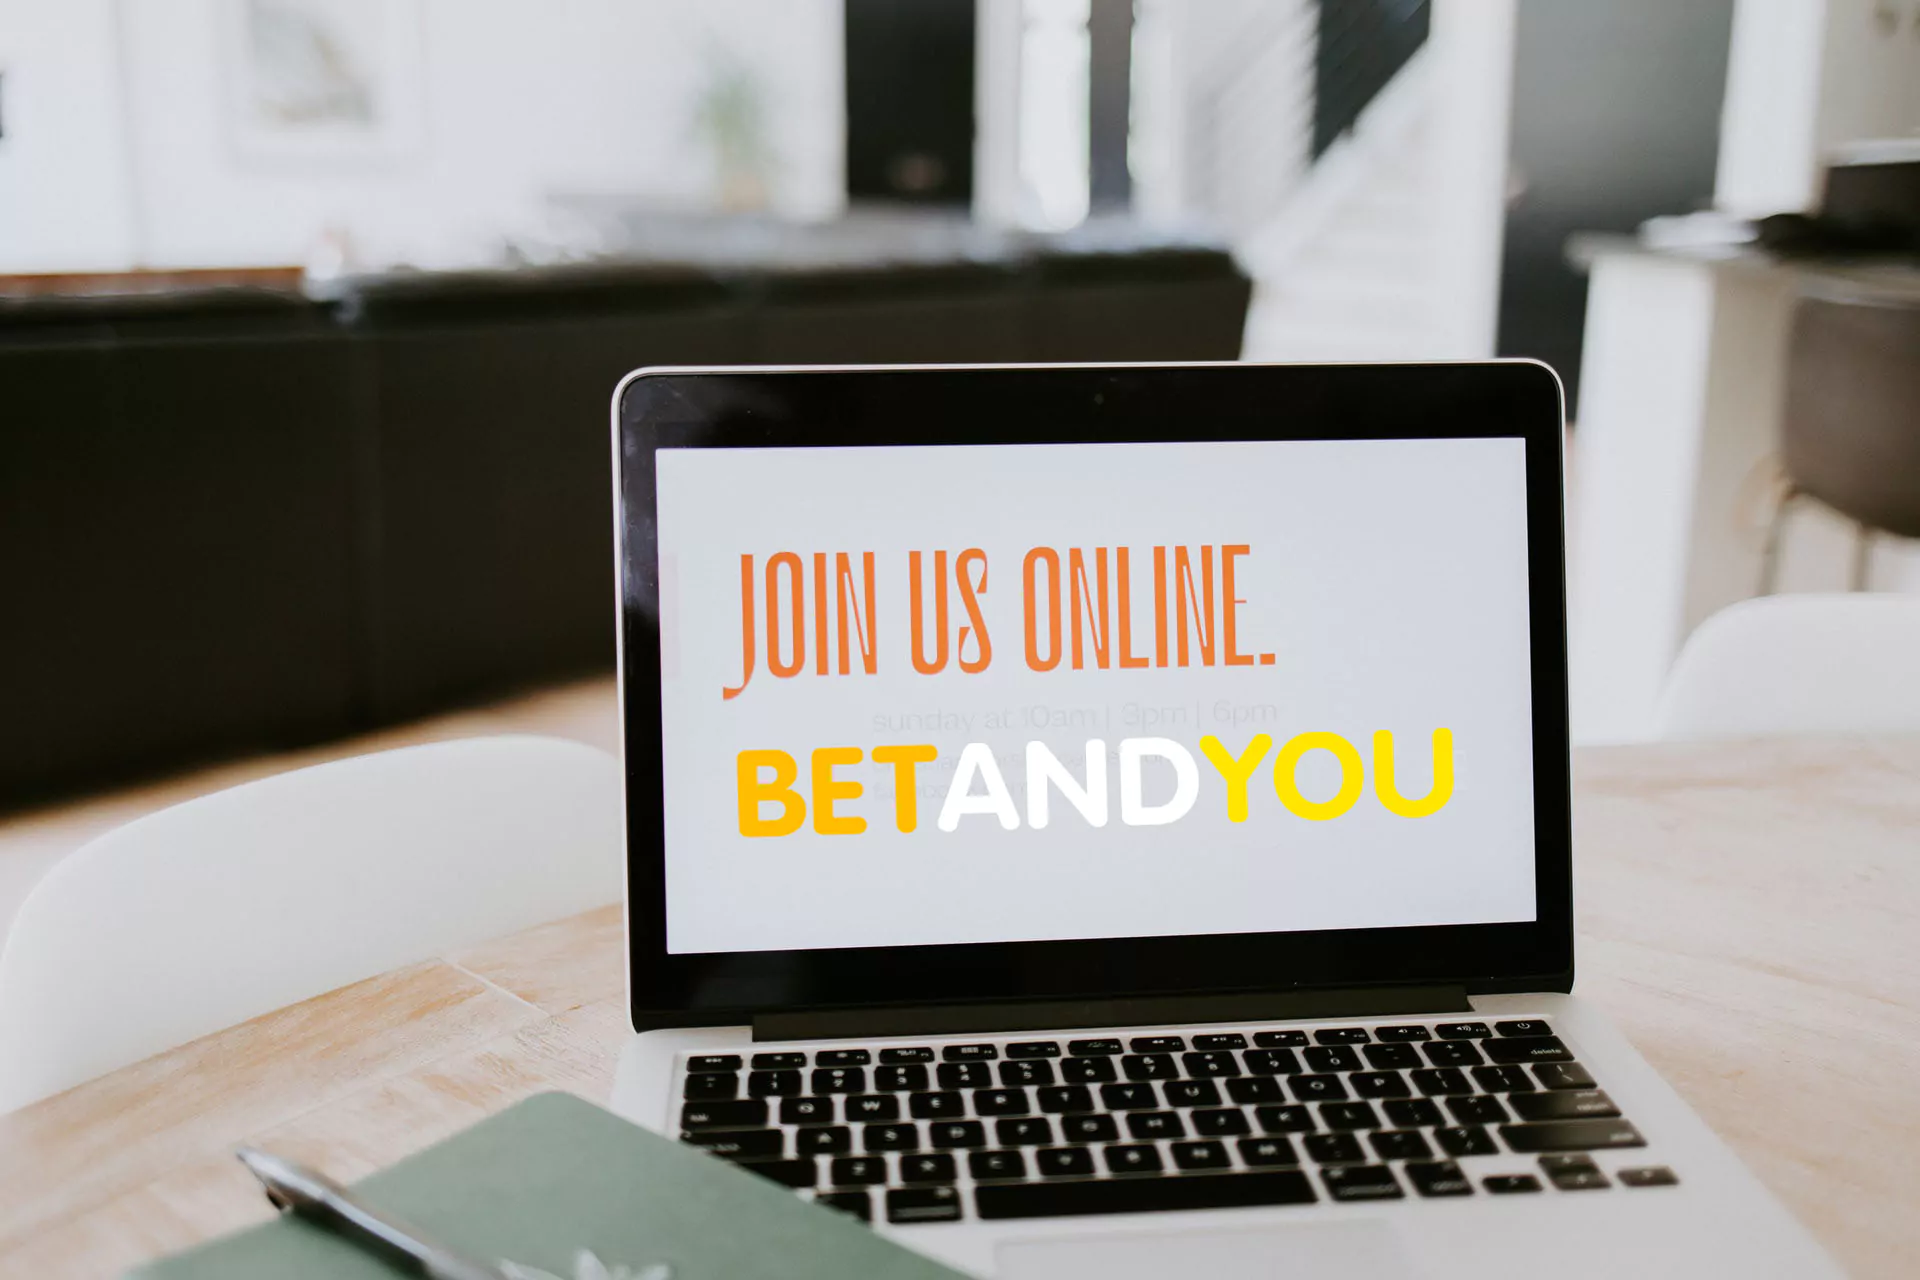 You can choose one convenient way to register at BetAndYou.